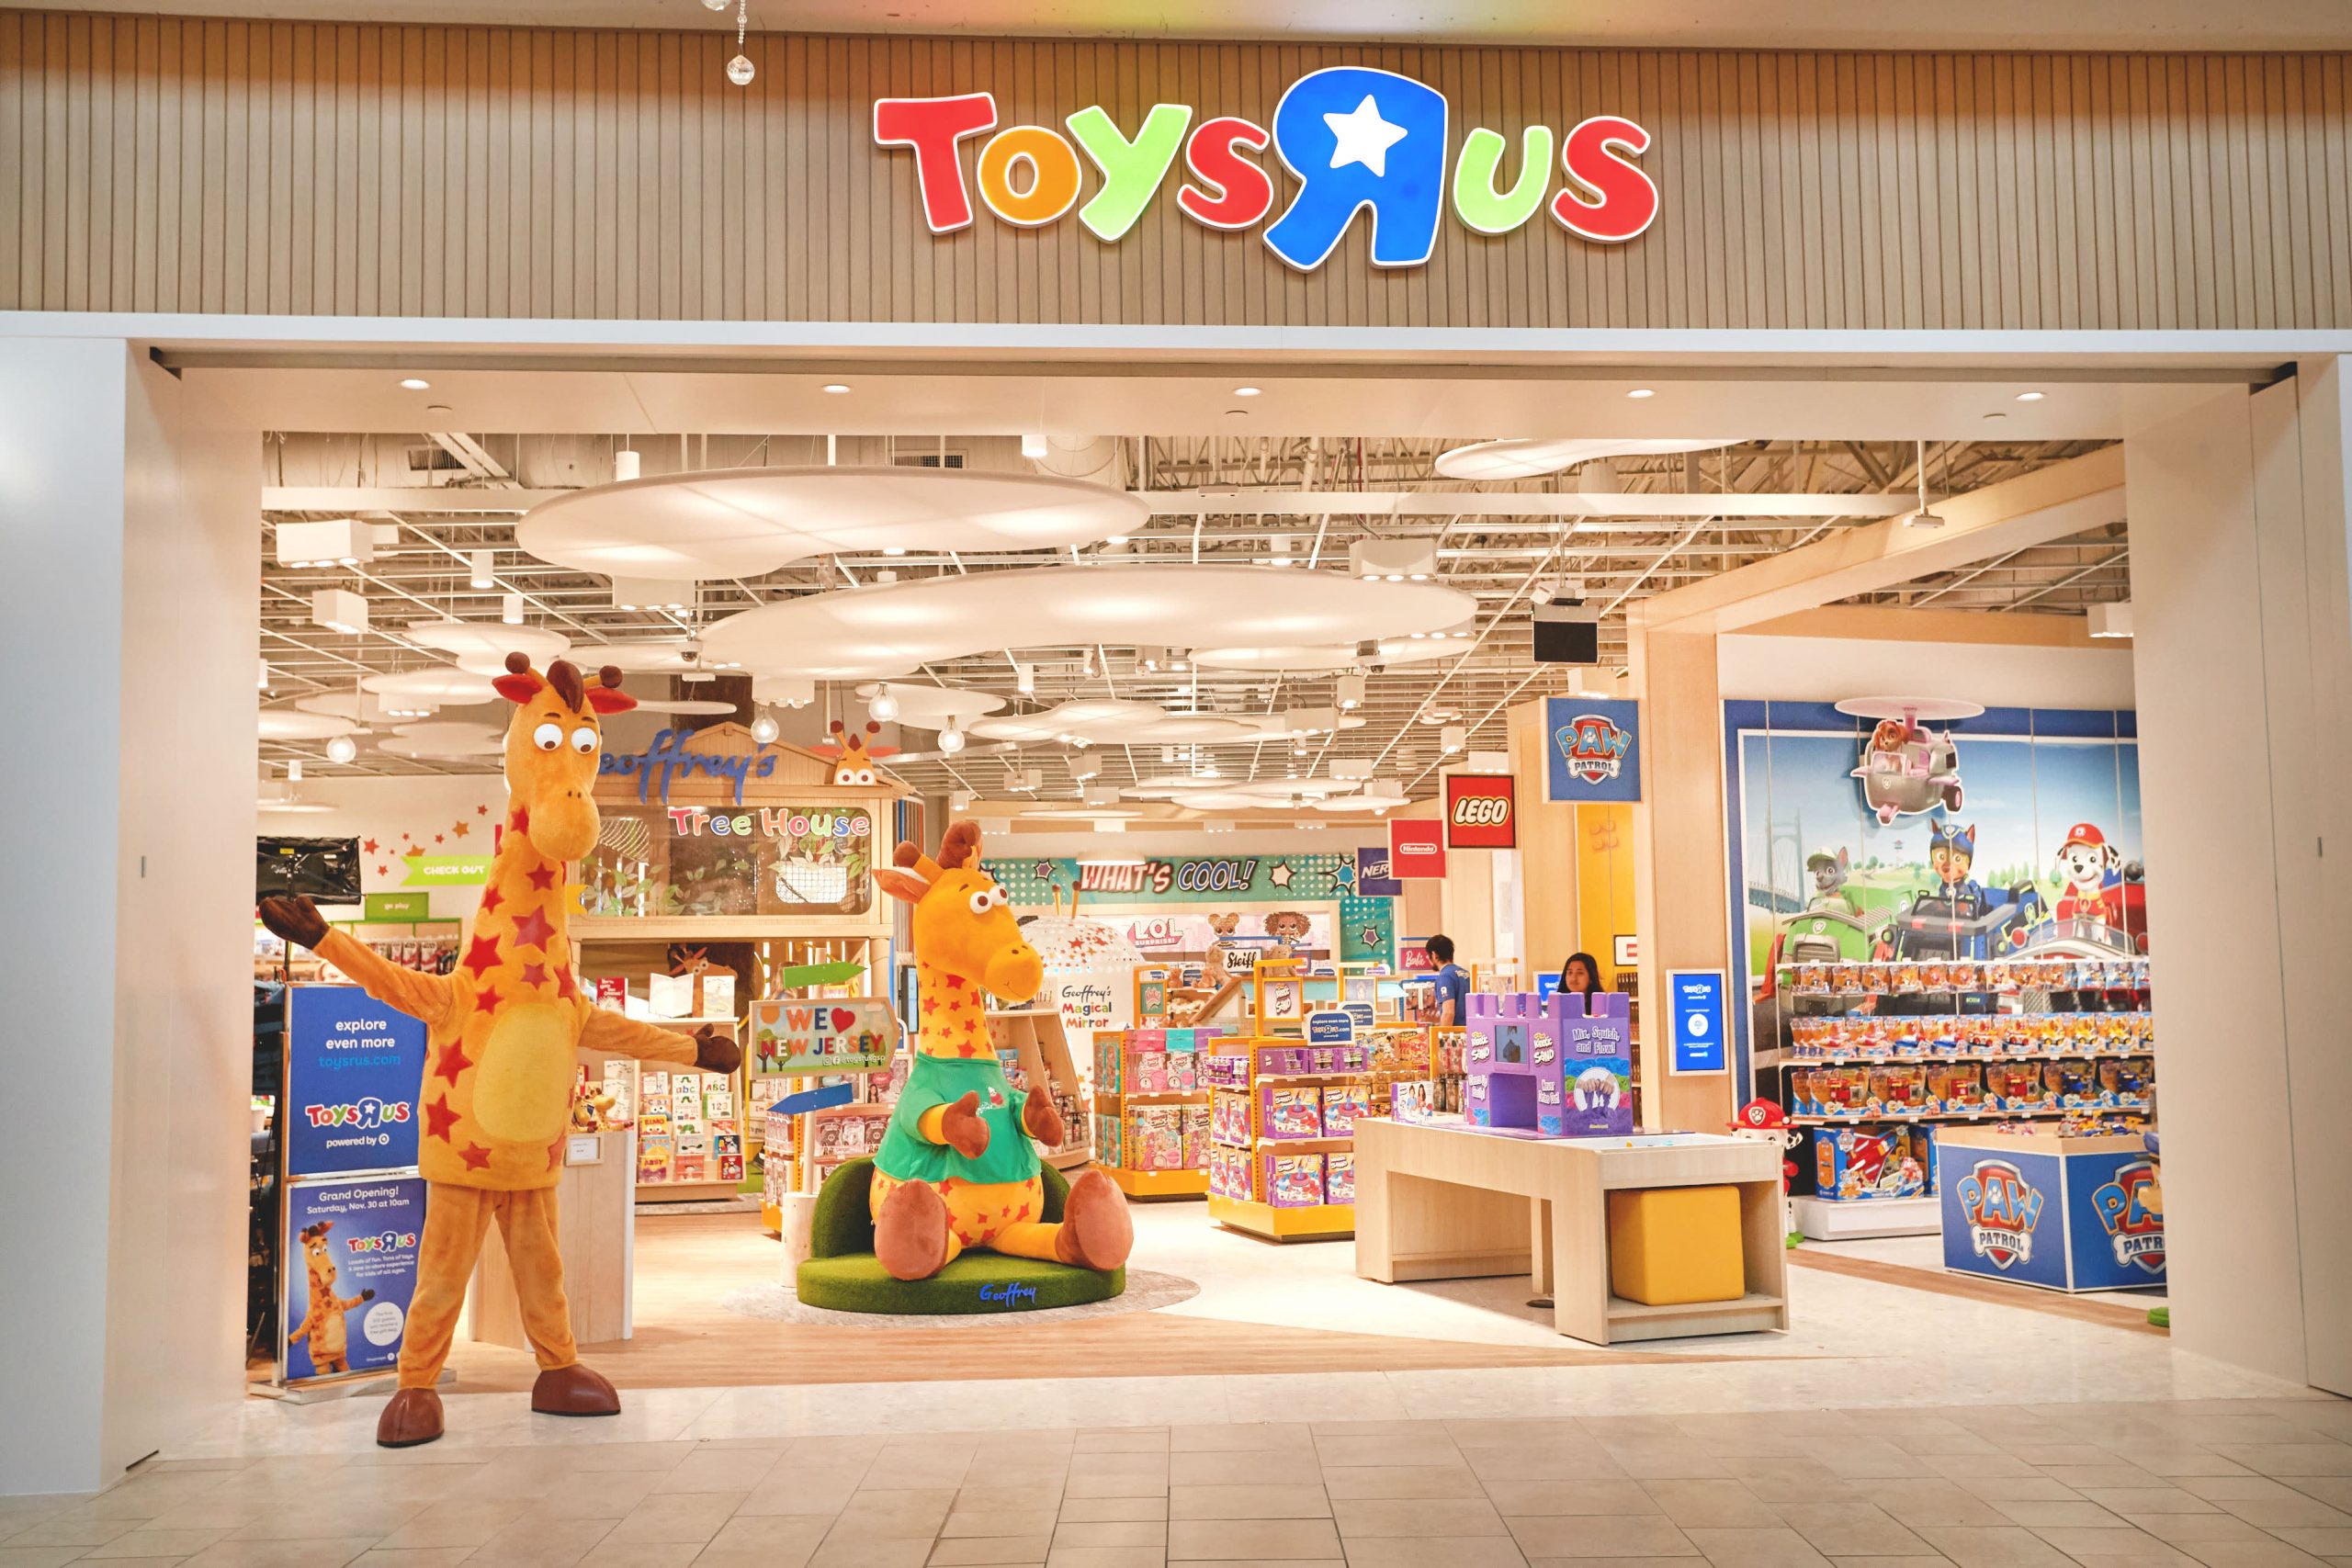 Toys R Us’ final two shops within the U.S. are closed for good